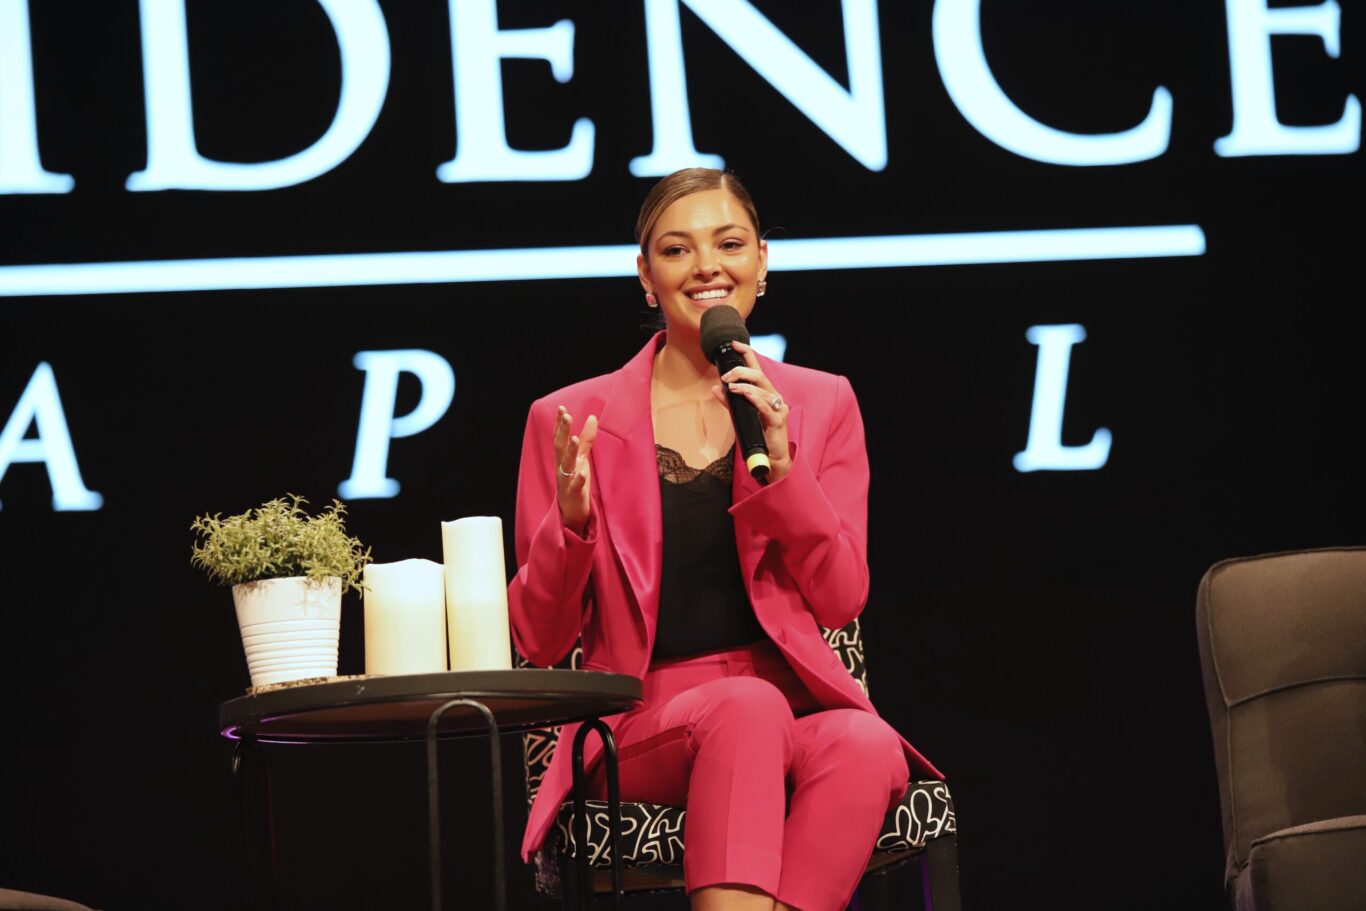 Demi Tebow, a woman in a pink suit, is sitting in a chair at a Special Chapel event.